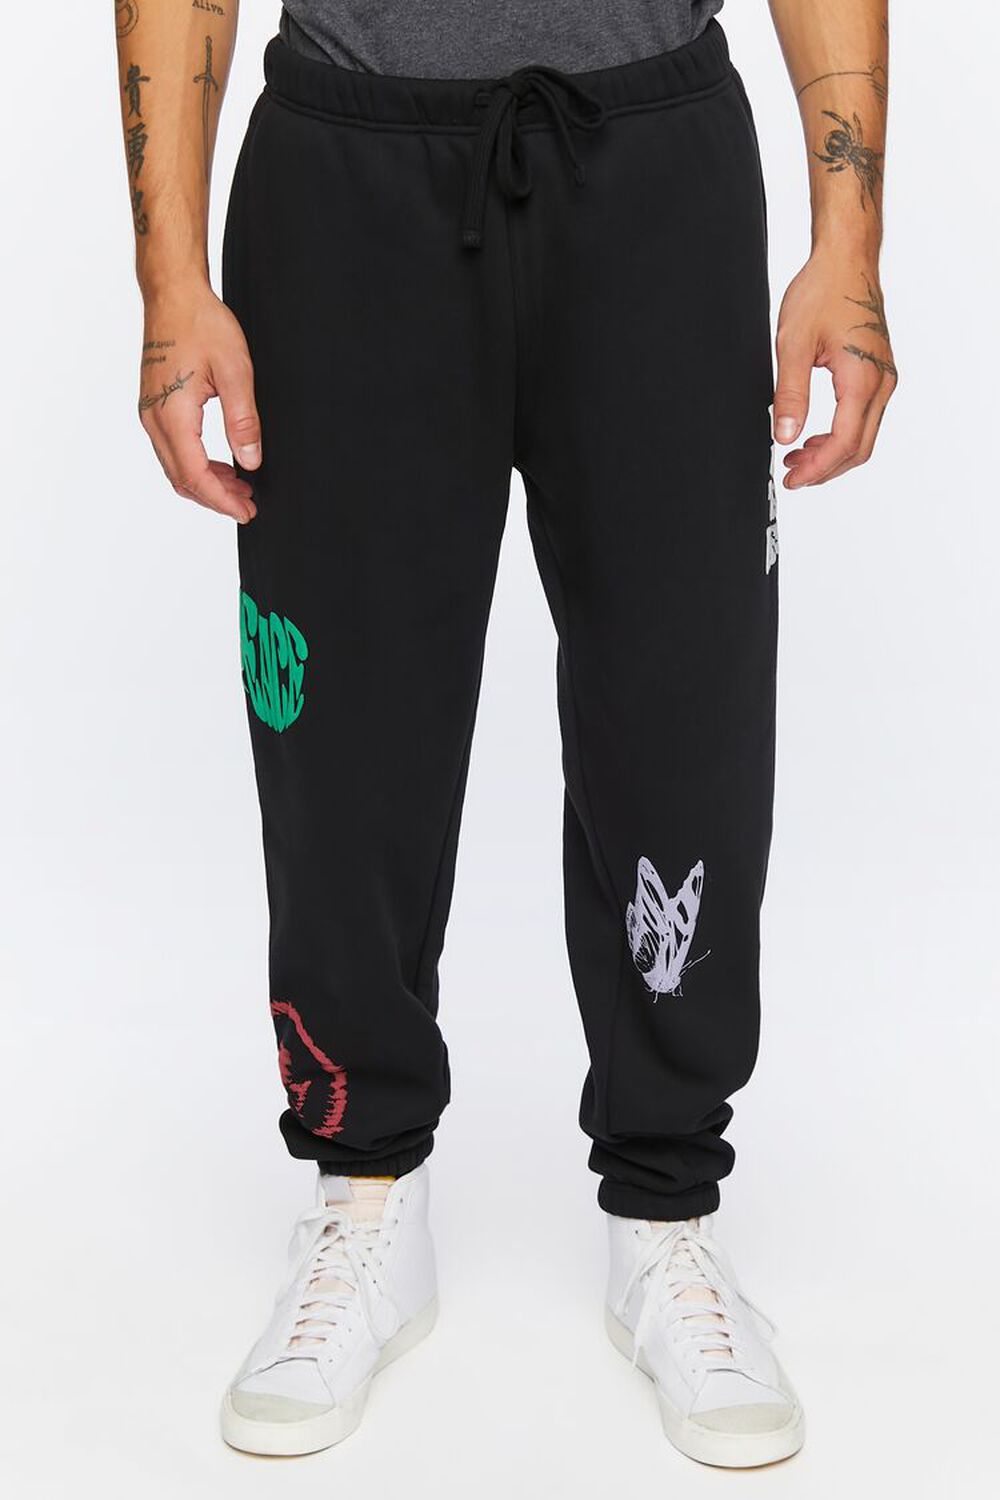 BLACK/MULTI Hope For The Best Graphic Joggers, image 2